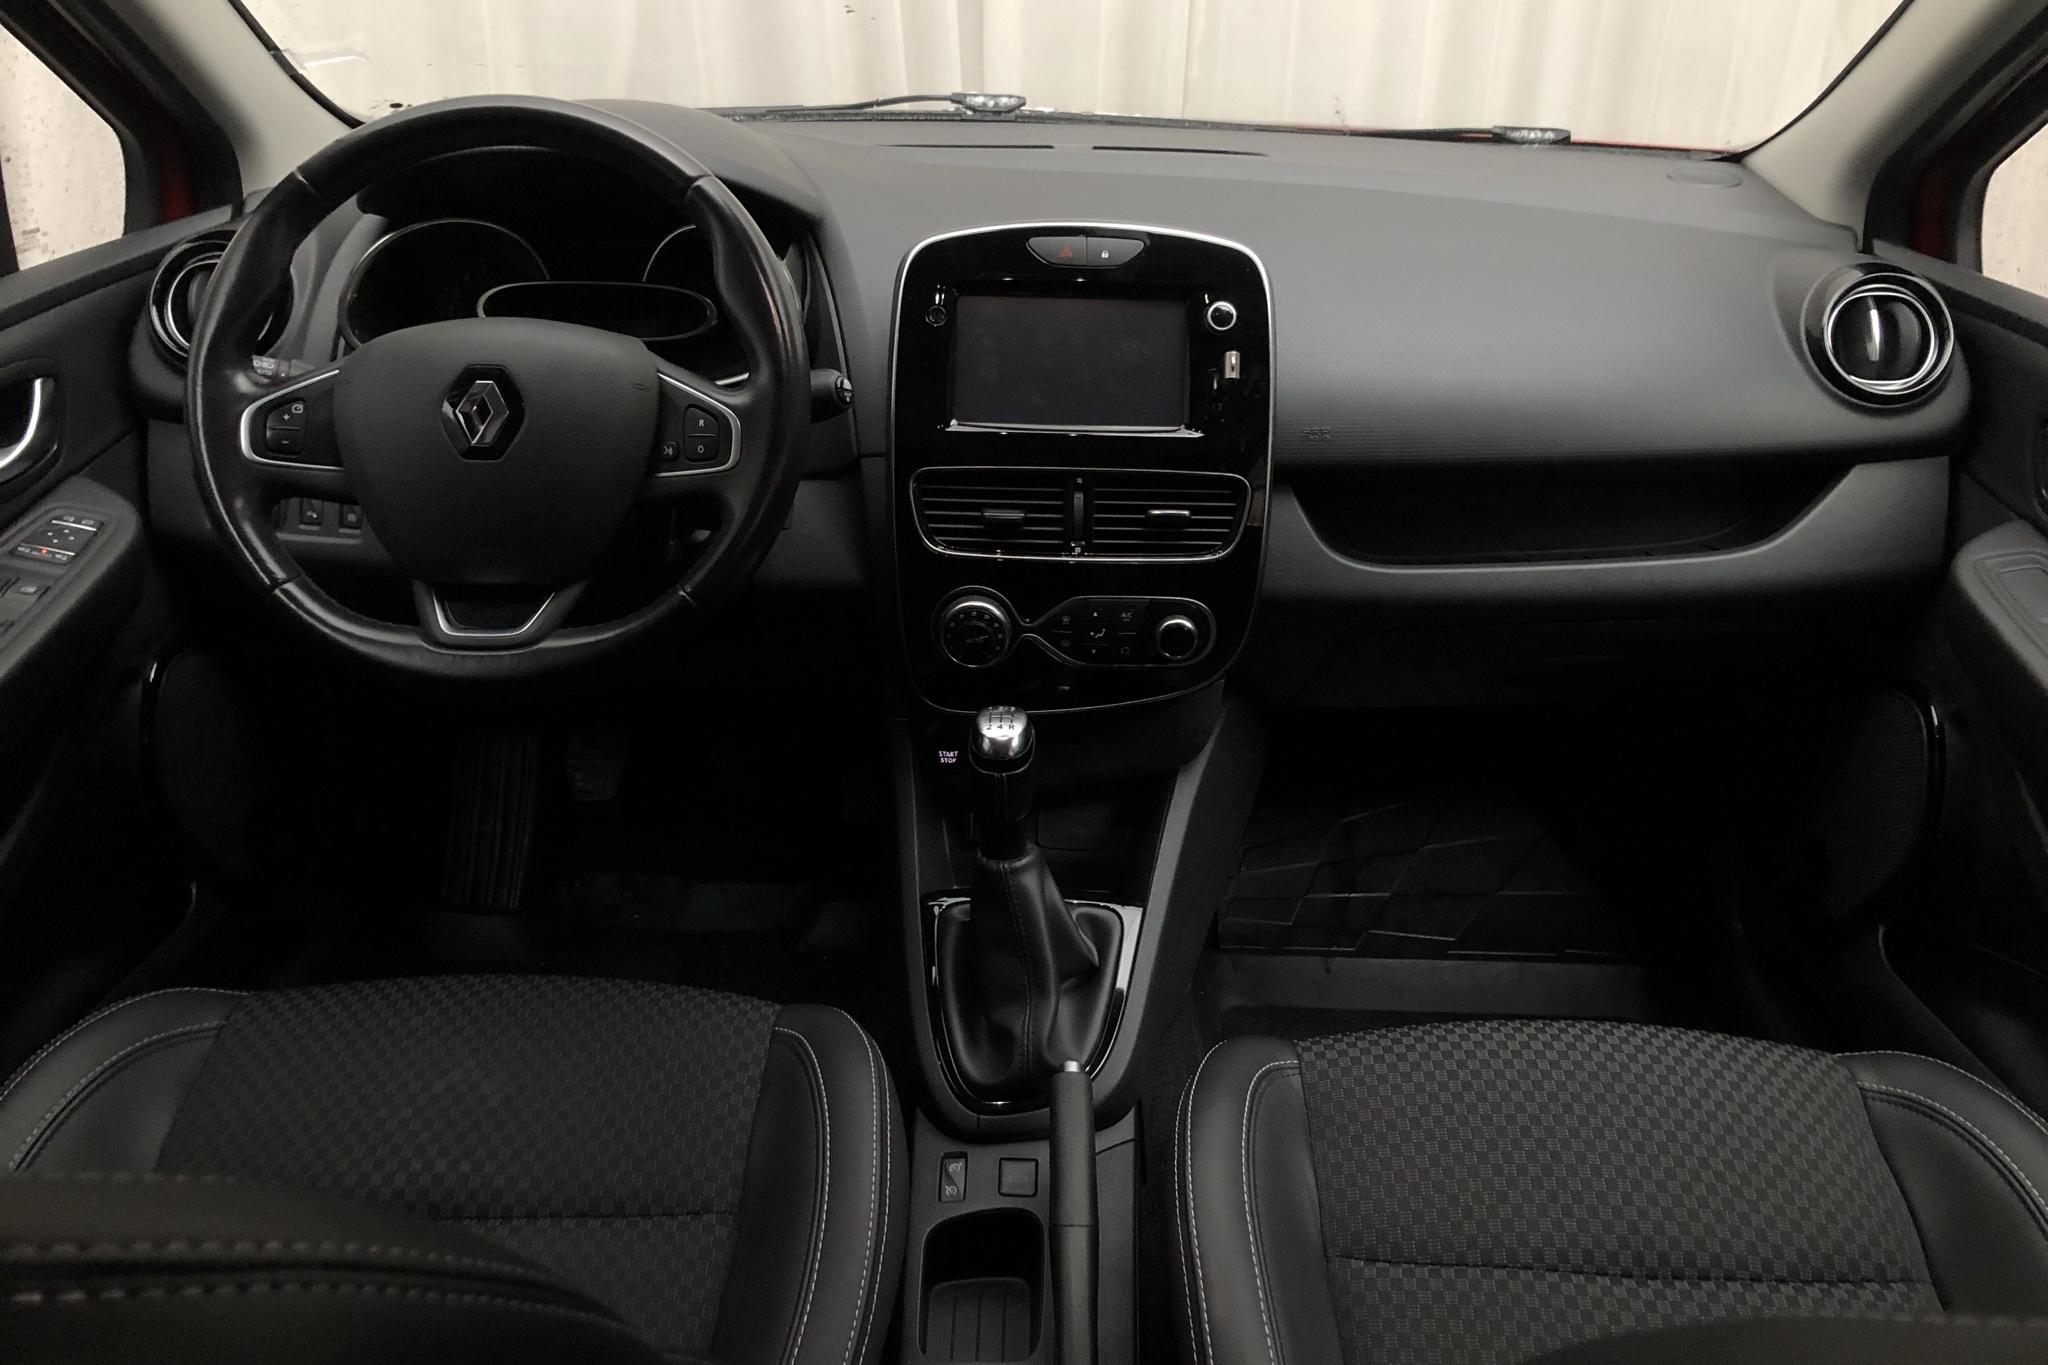 Renault Clio IV 0.9 TCe 90 5dr (90hk) - 55 910 km - Manual - 2017